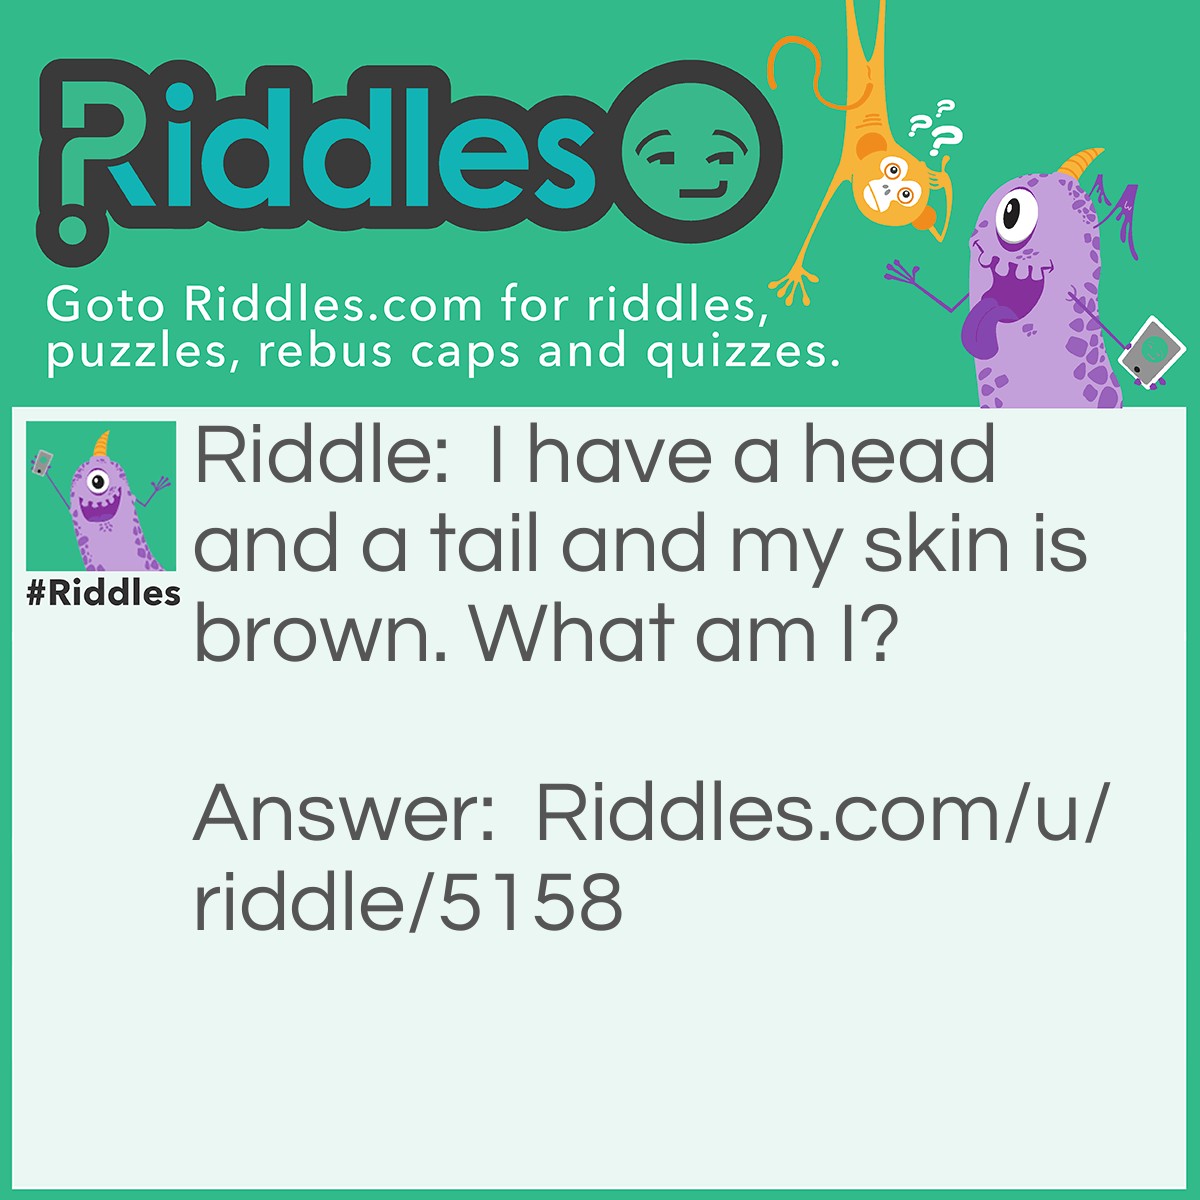 Riddle: I have a head and a tail and my skin is brown. What am I? Answer: A penny.